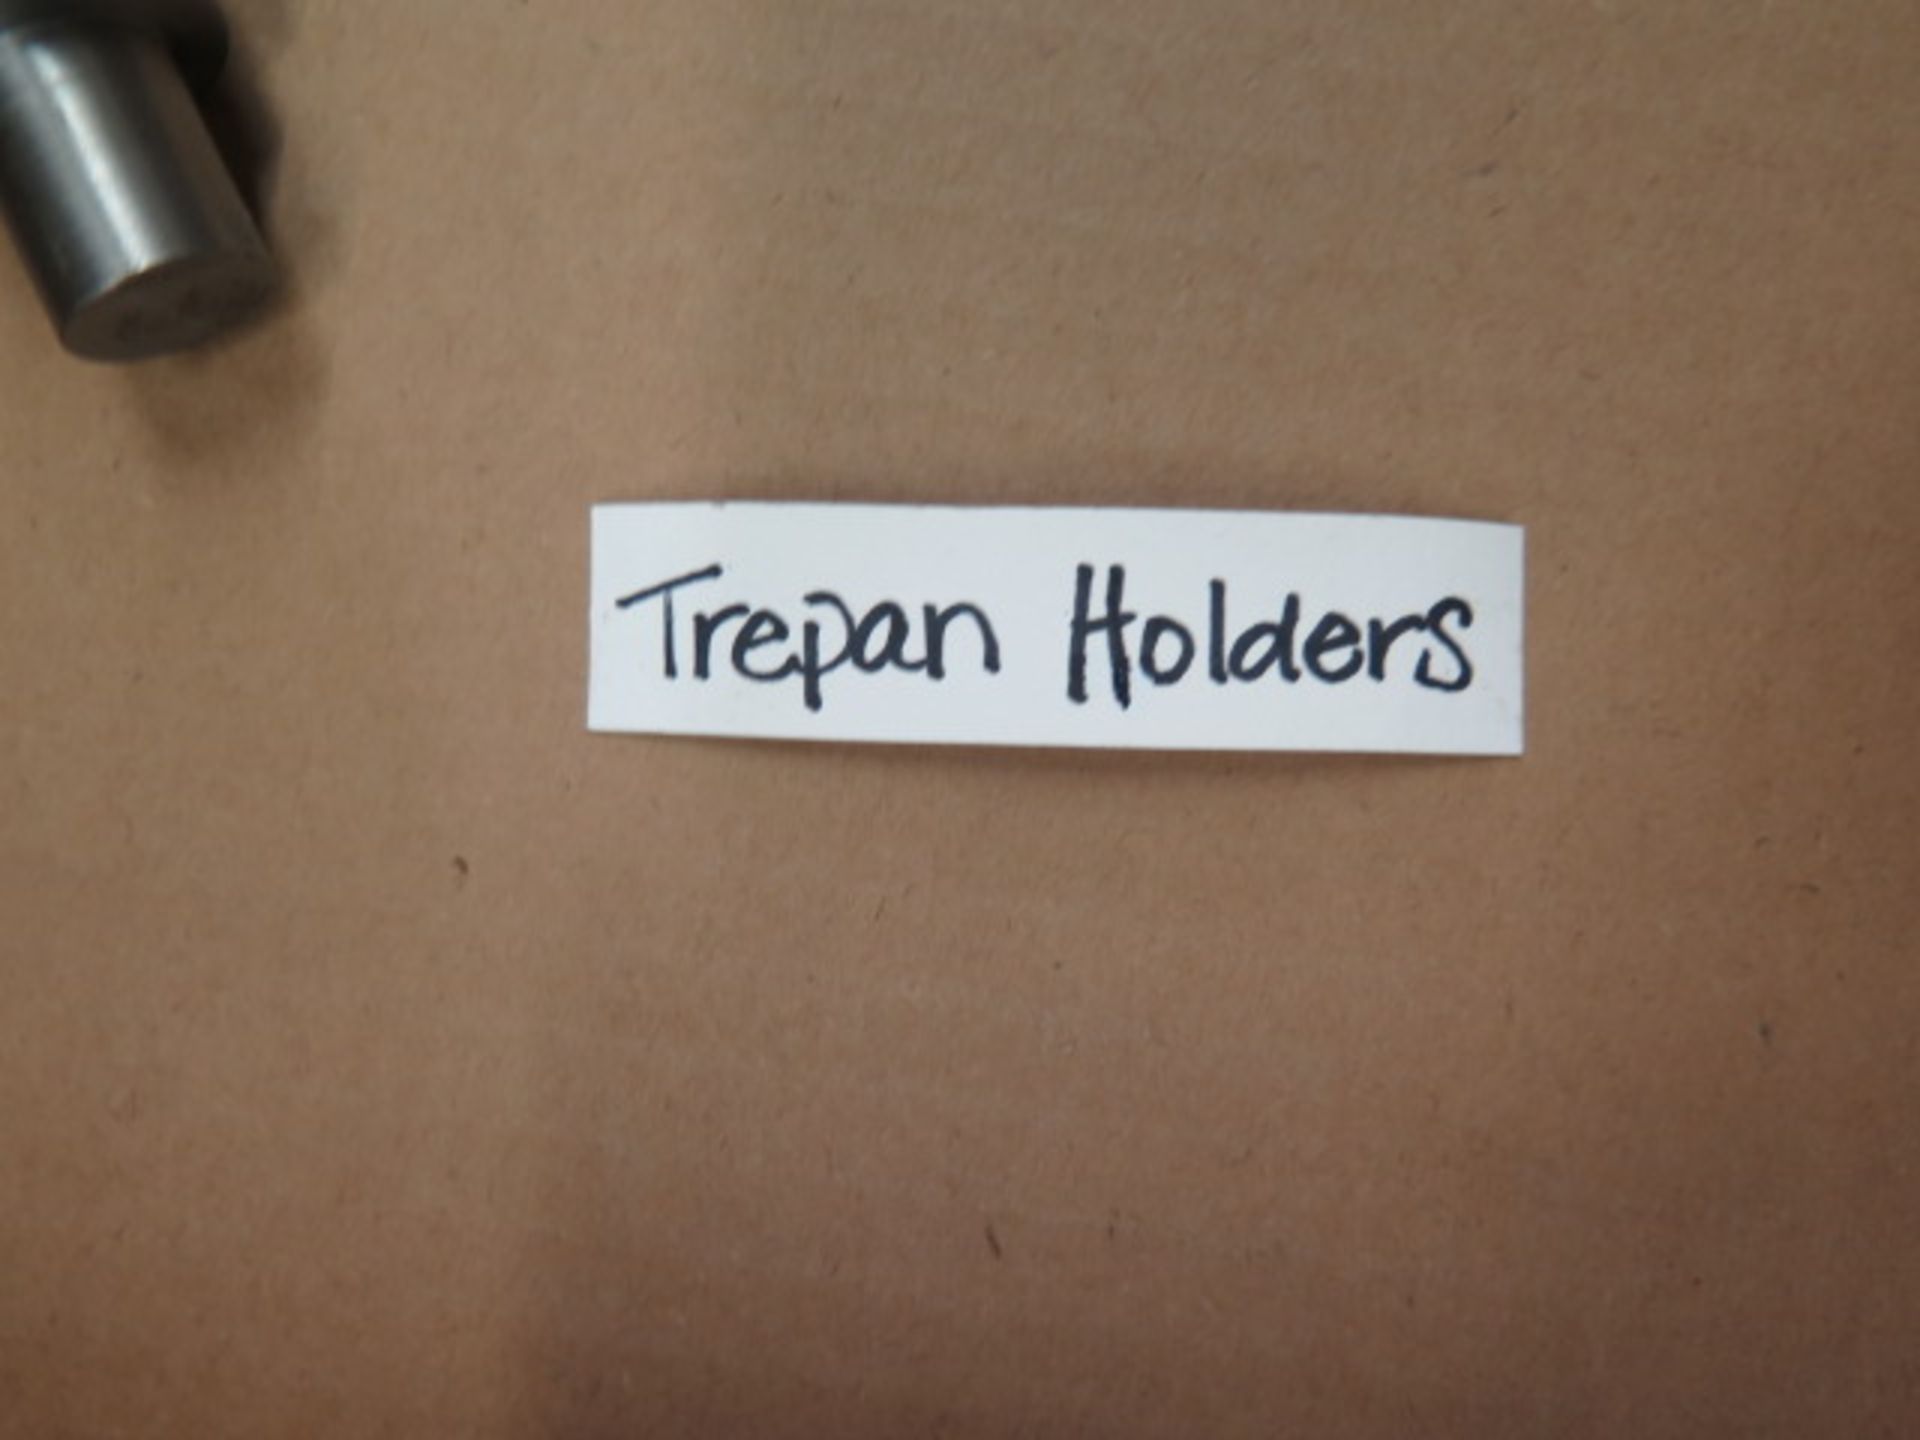 Treepan Tool Holders (SOLD AS-IS - NO WARRANTY) - Image 4 of 4